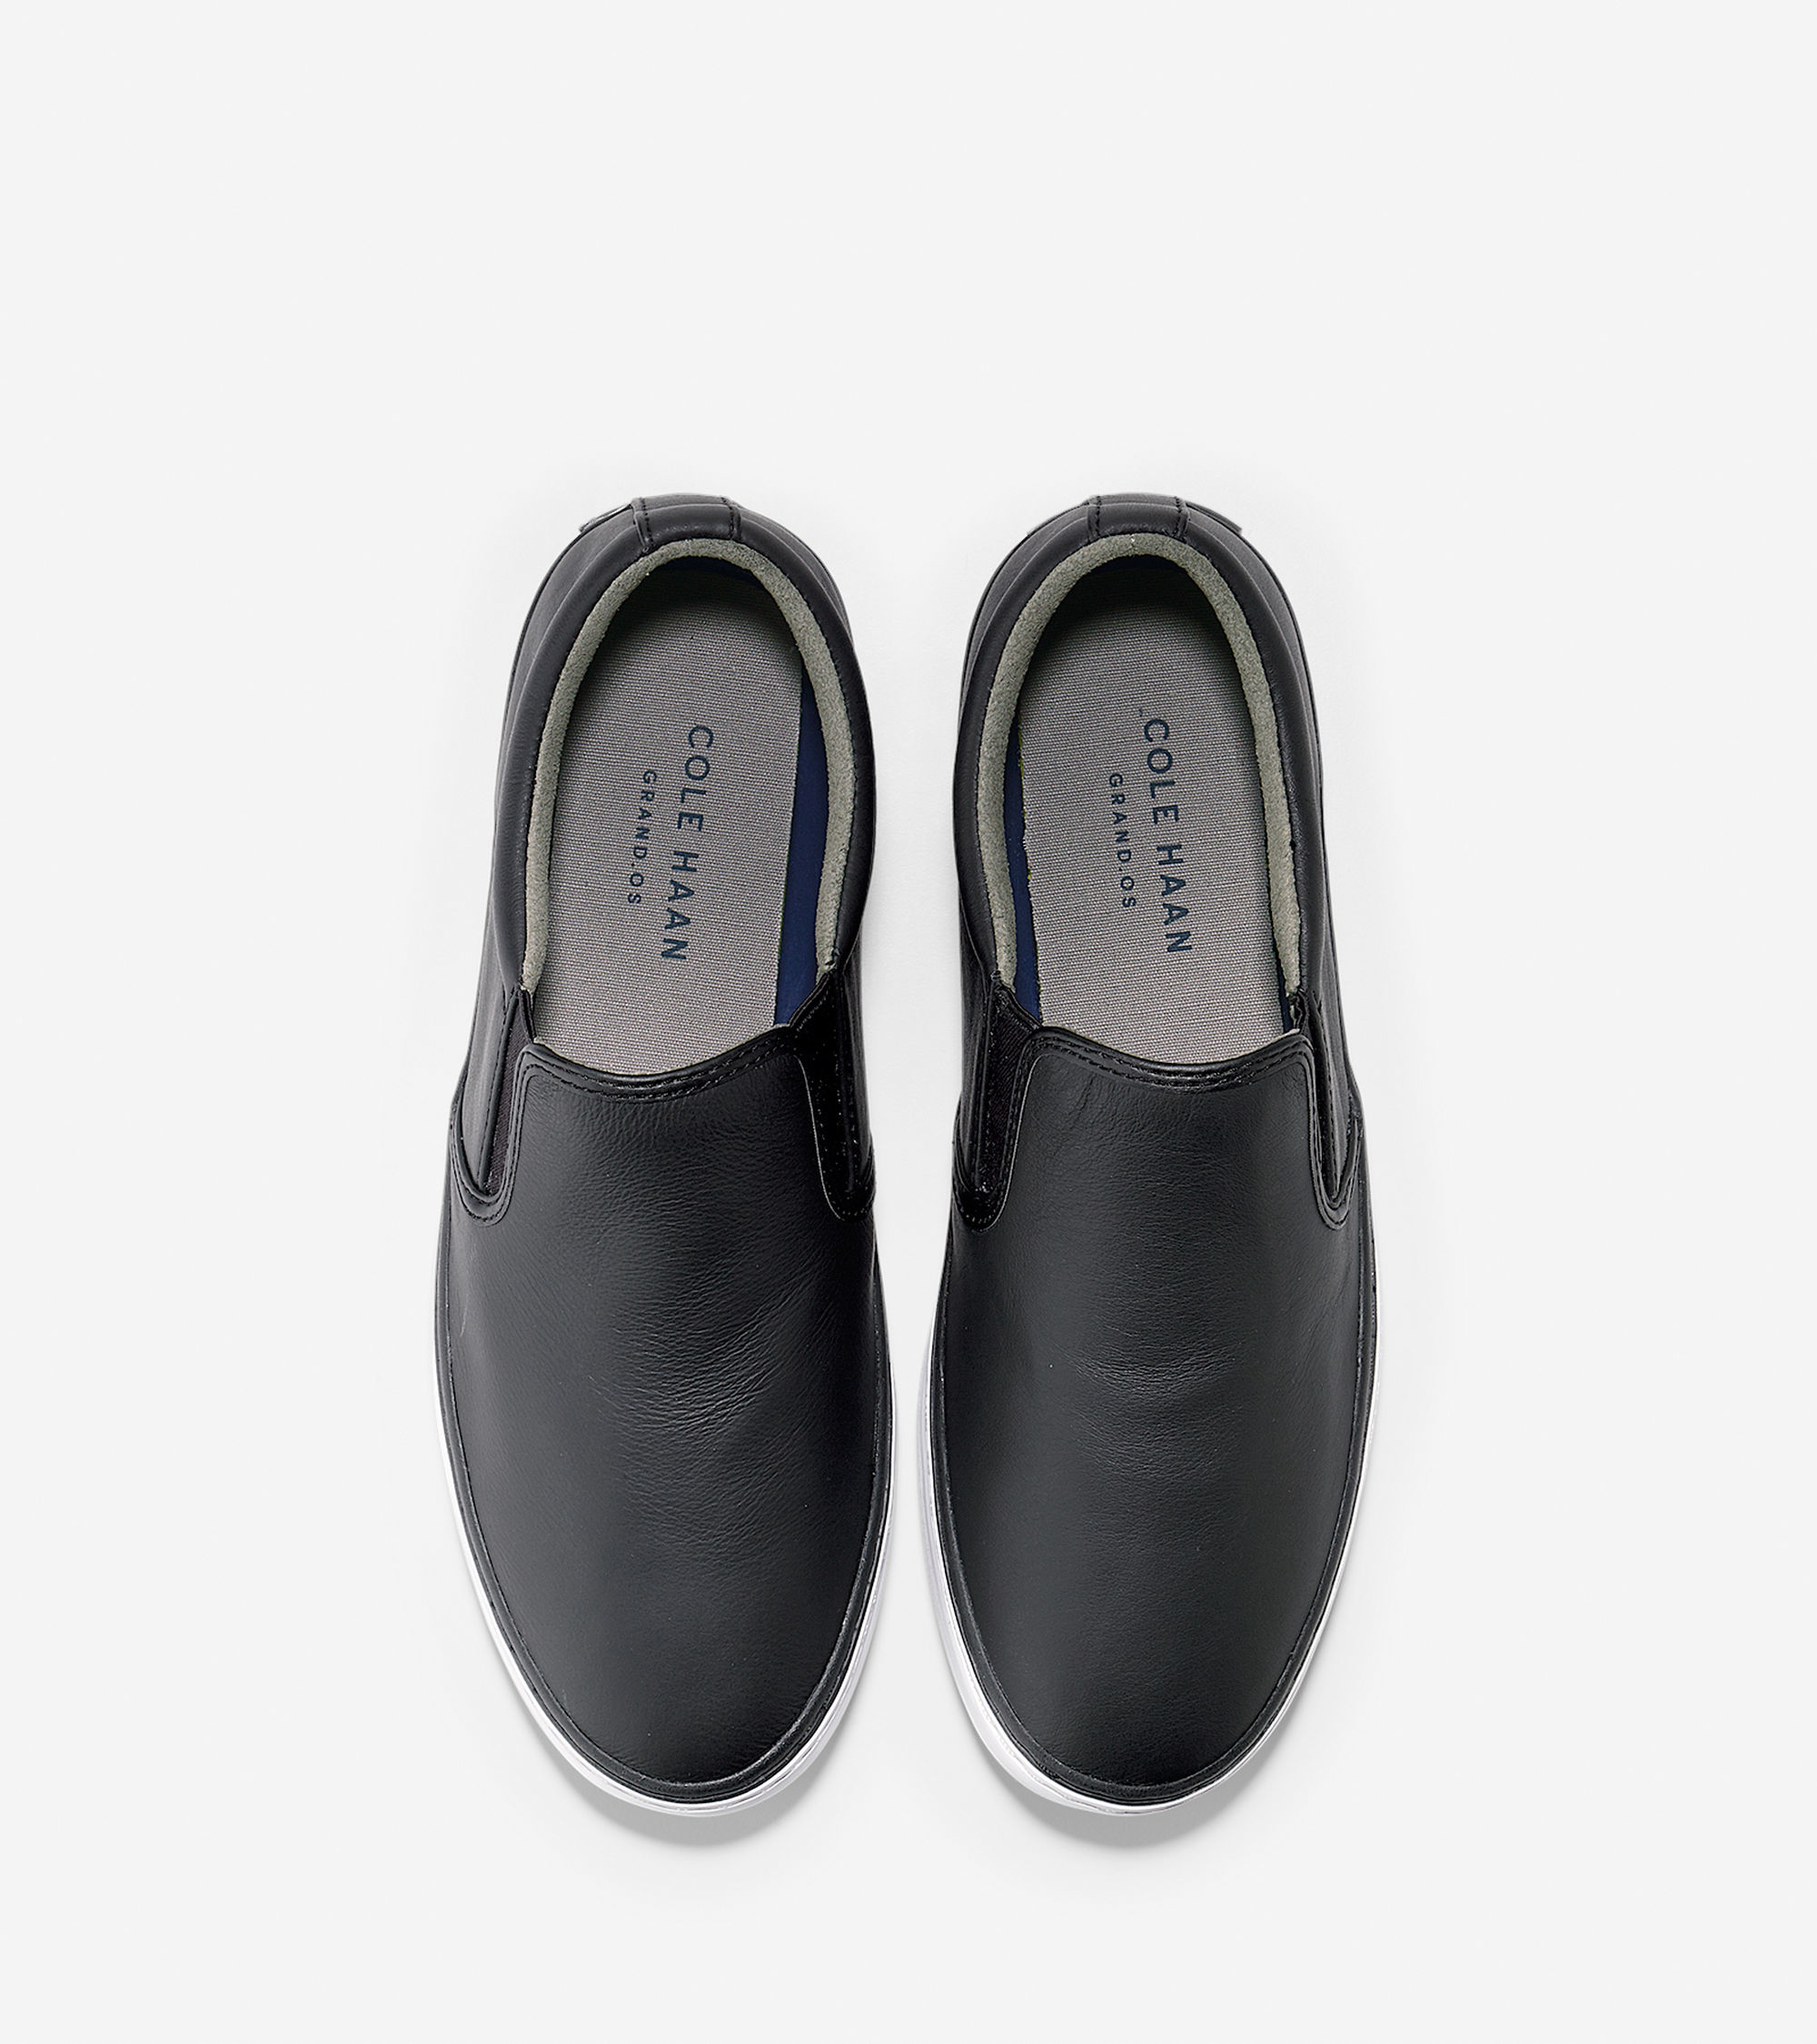 Lyst - Cole Haan Falmouth Slip On in Black for Men